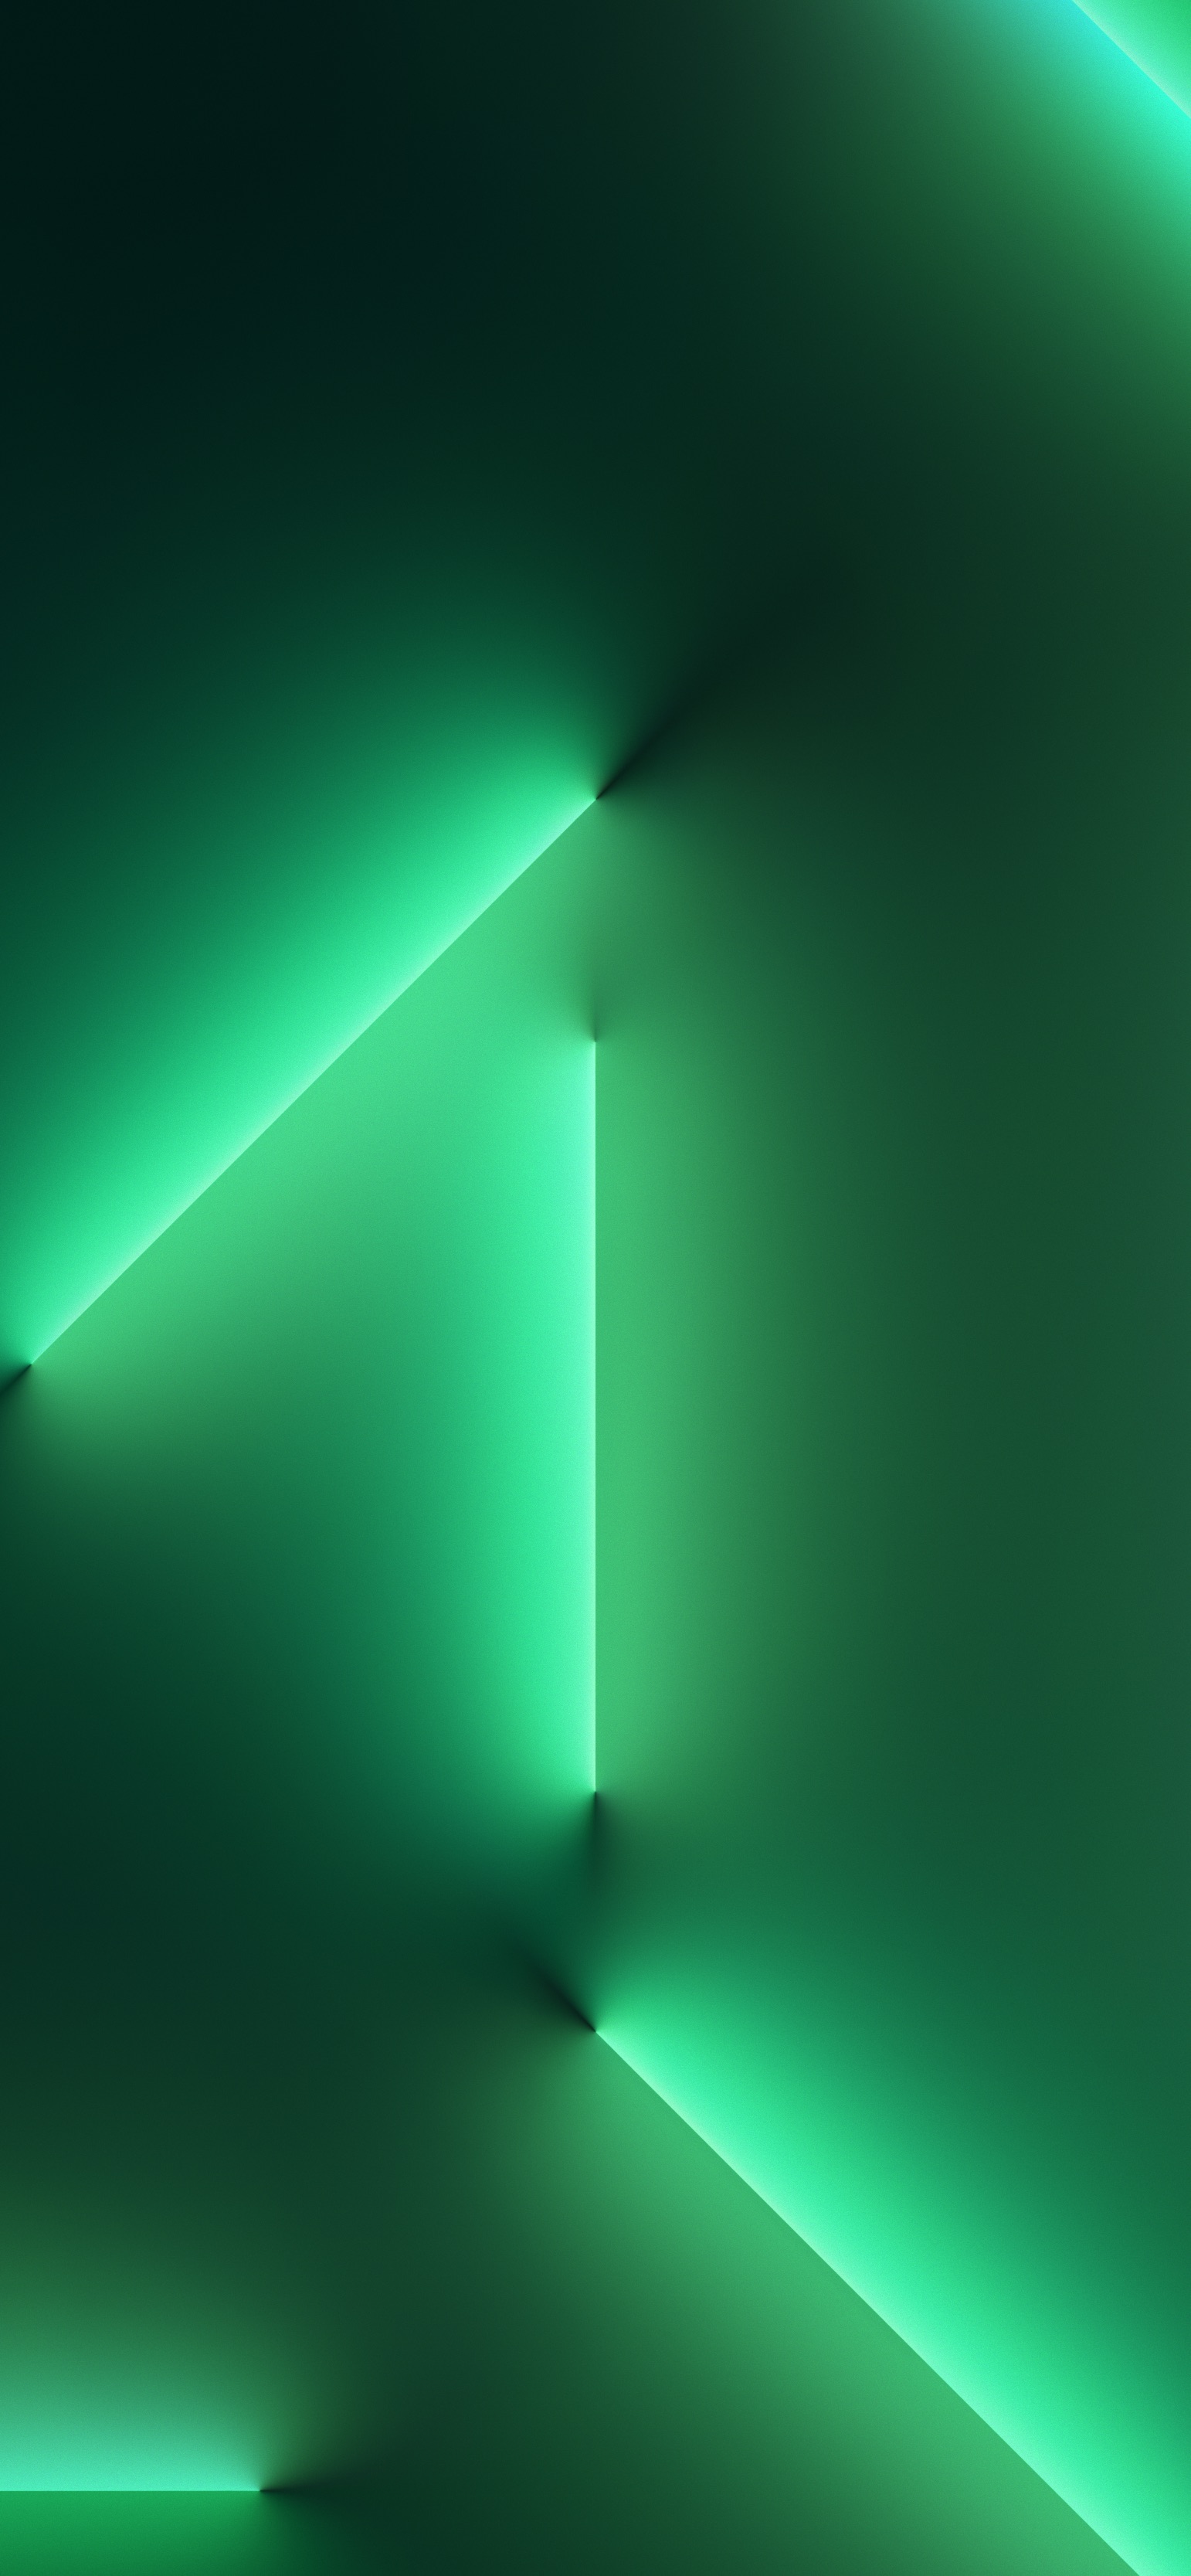 Download the new green iPhone 13 wallpaper right here